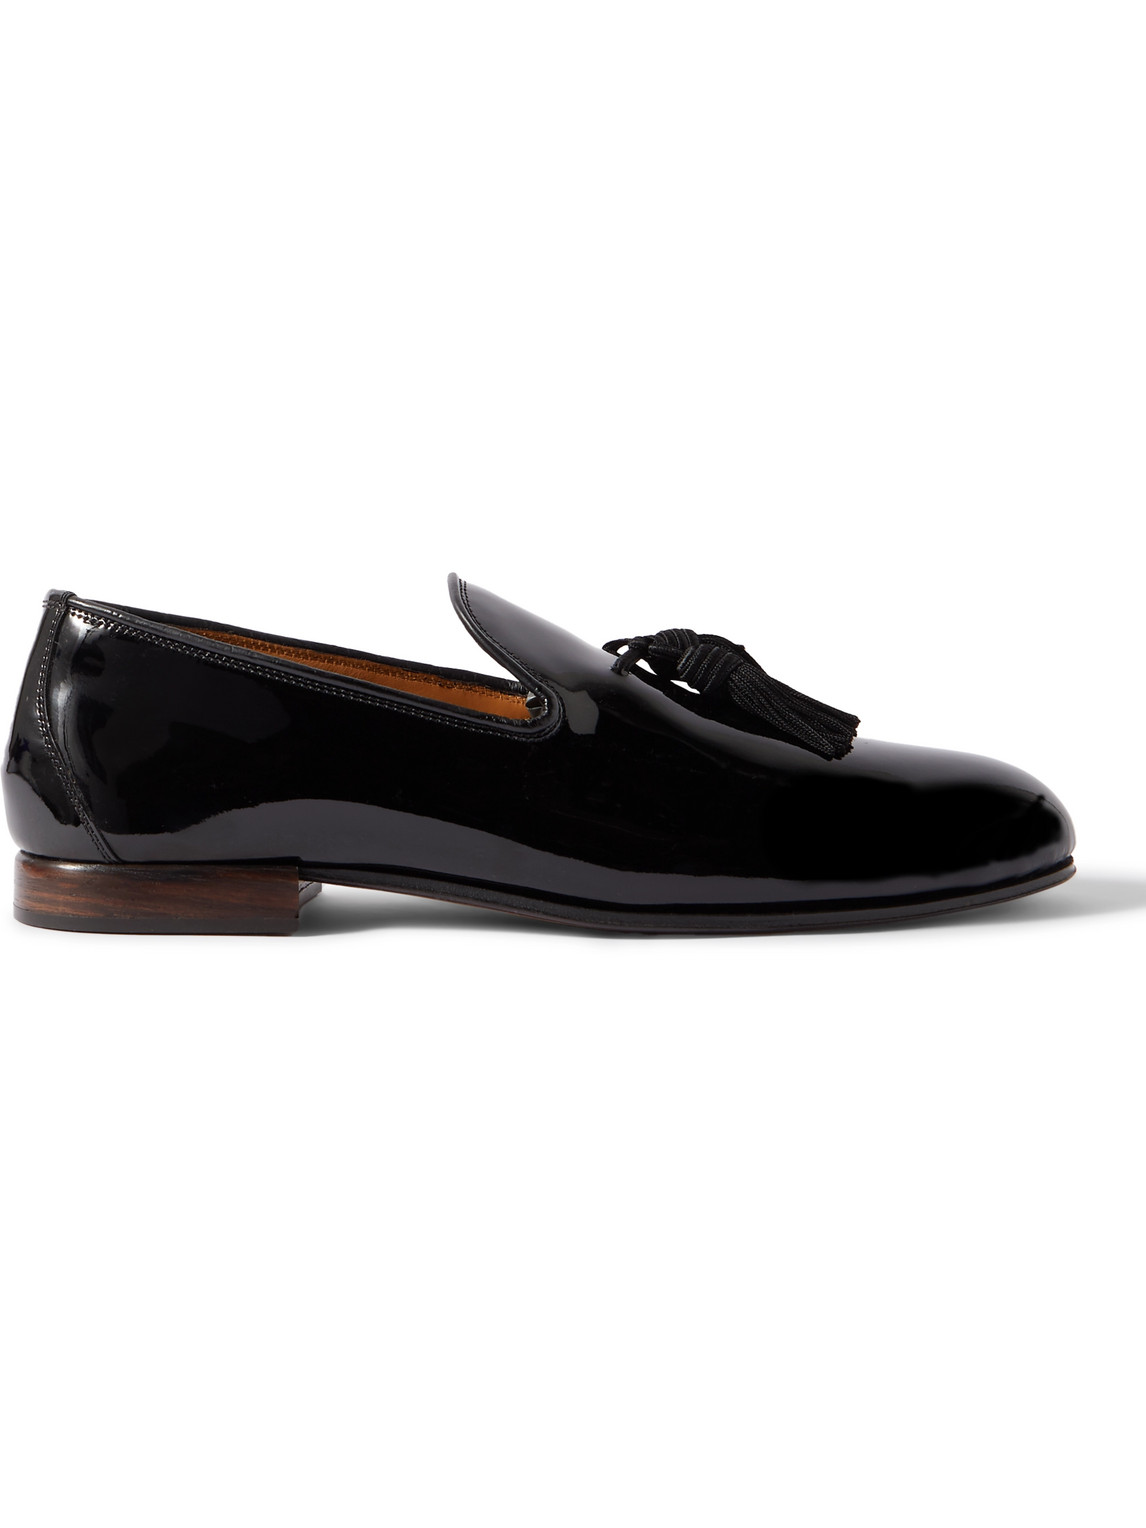 TOM FORD NICOLAS TASSELLED PATENT-LEATHER LOAFERS